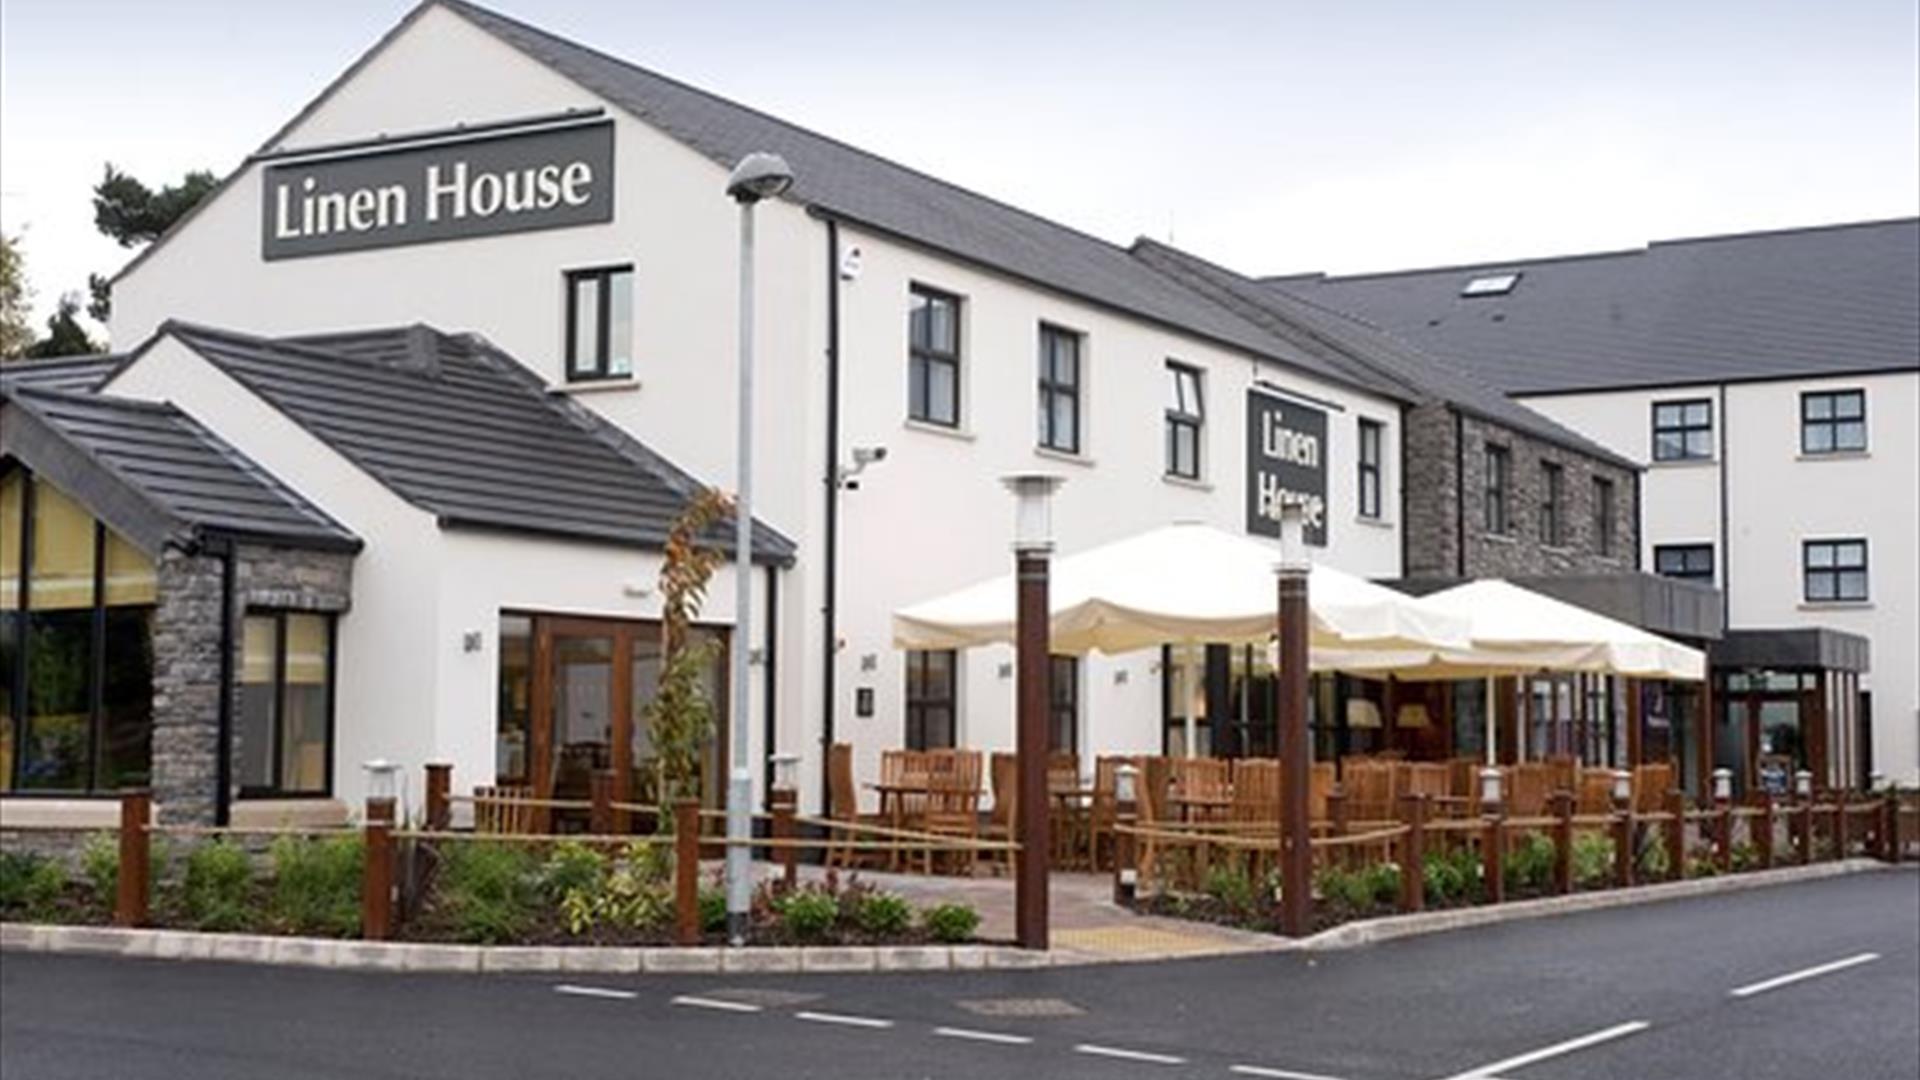 Image shows the exterior white building of Premier Inn Table Table Restaurant with a sign showing Linen House in grey and white writing and outside wo